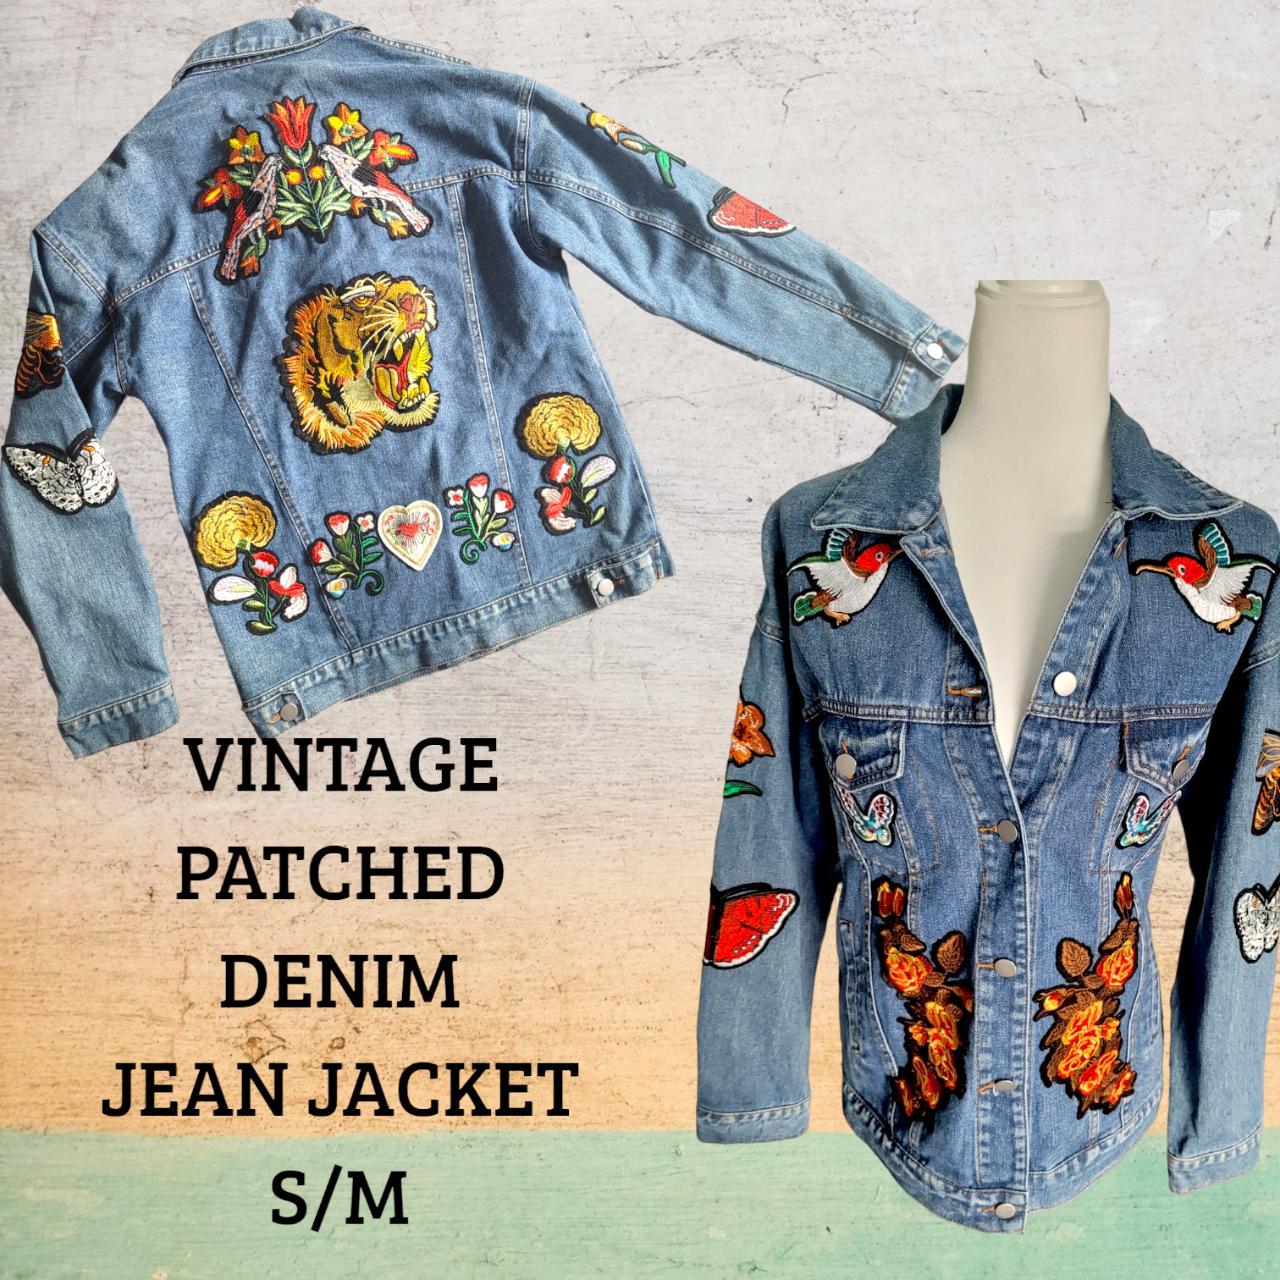 Upcycled Jean Jacket With Patches / Reworked Vintage Jean Jacket